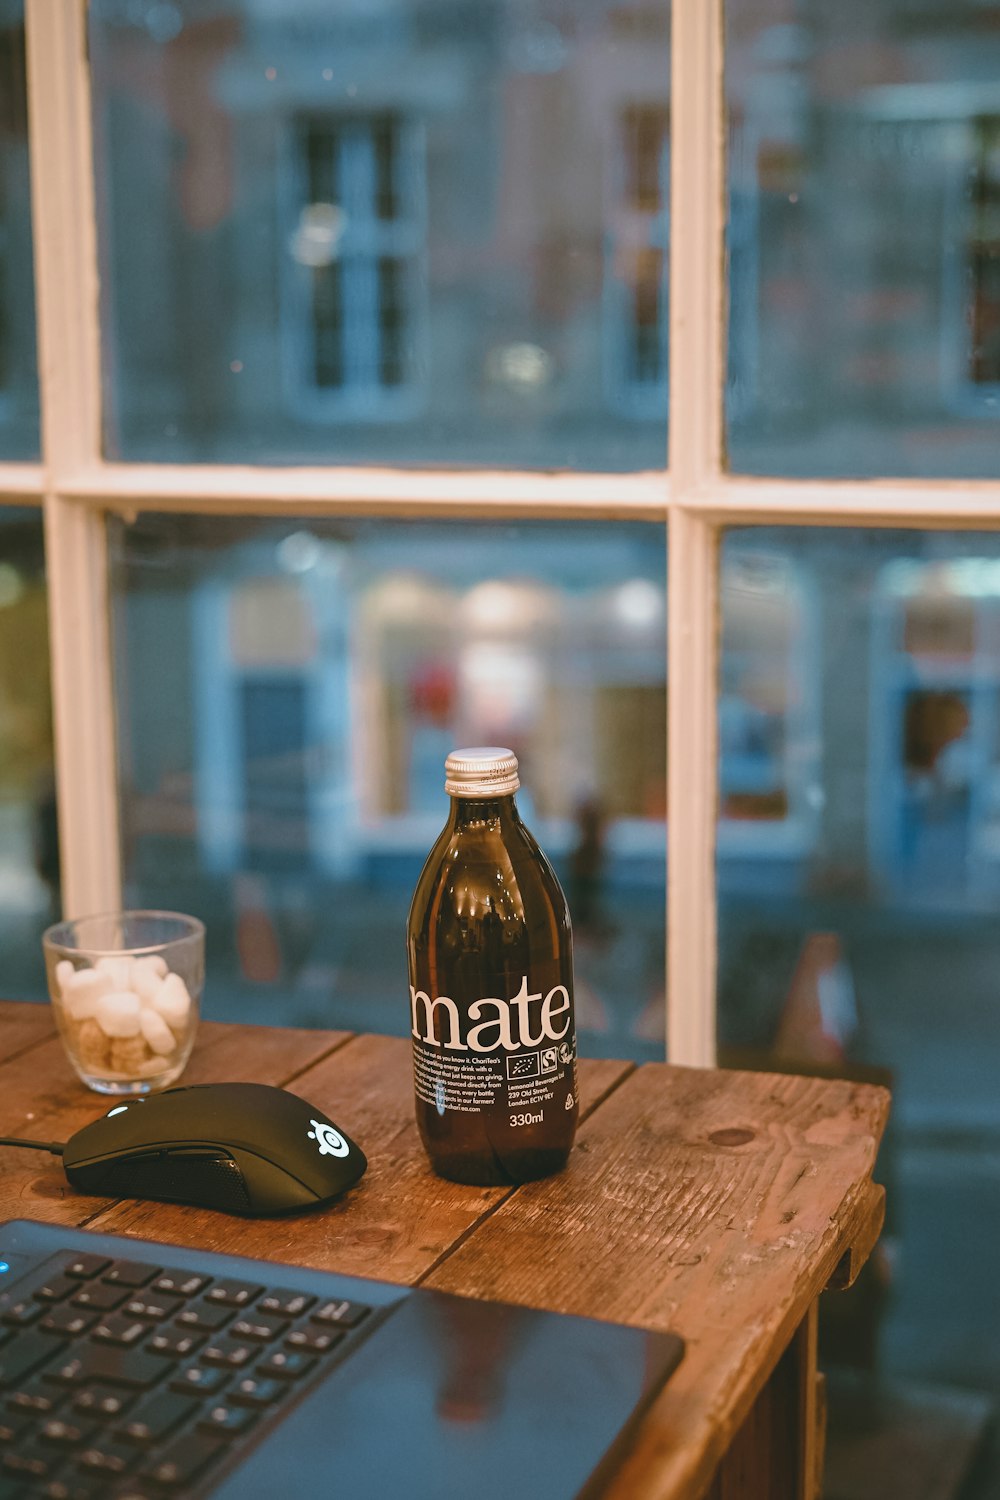 brown glass bottle near drinking glass and laptop on brown wooden table